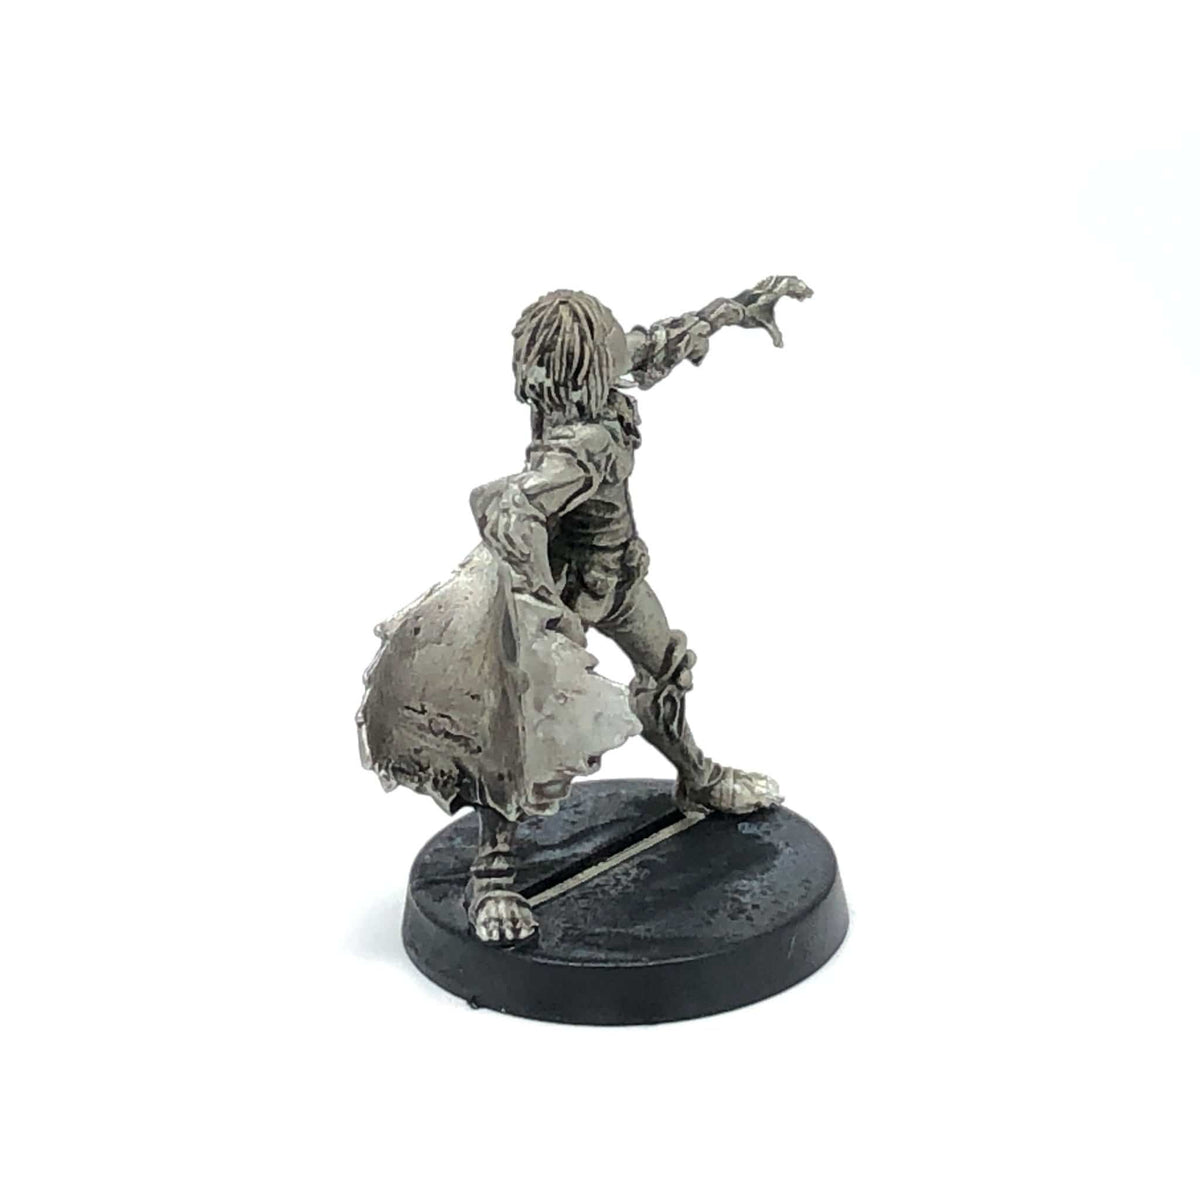 Sisters of Death Witch Elves Wights Miniature Bedlem Bear Miniatures Exit 23 Games Sisters of Death Witch Elves Wights